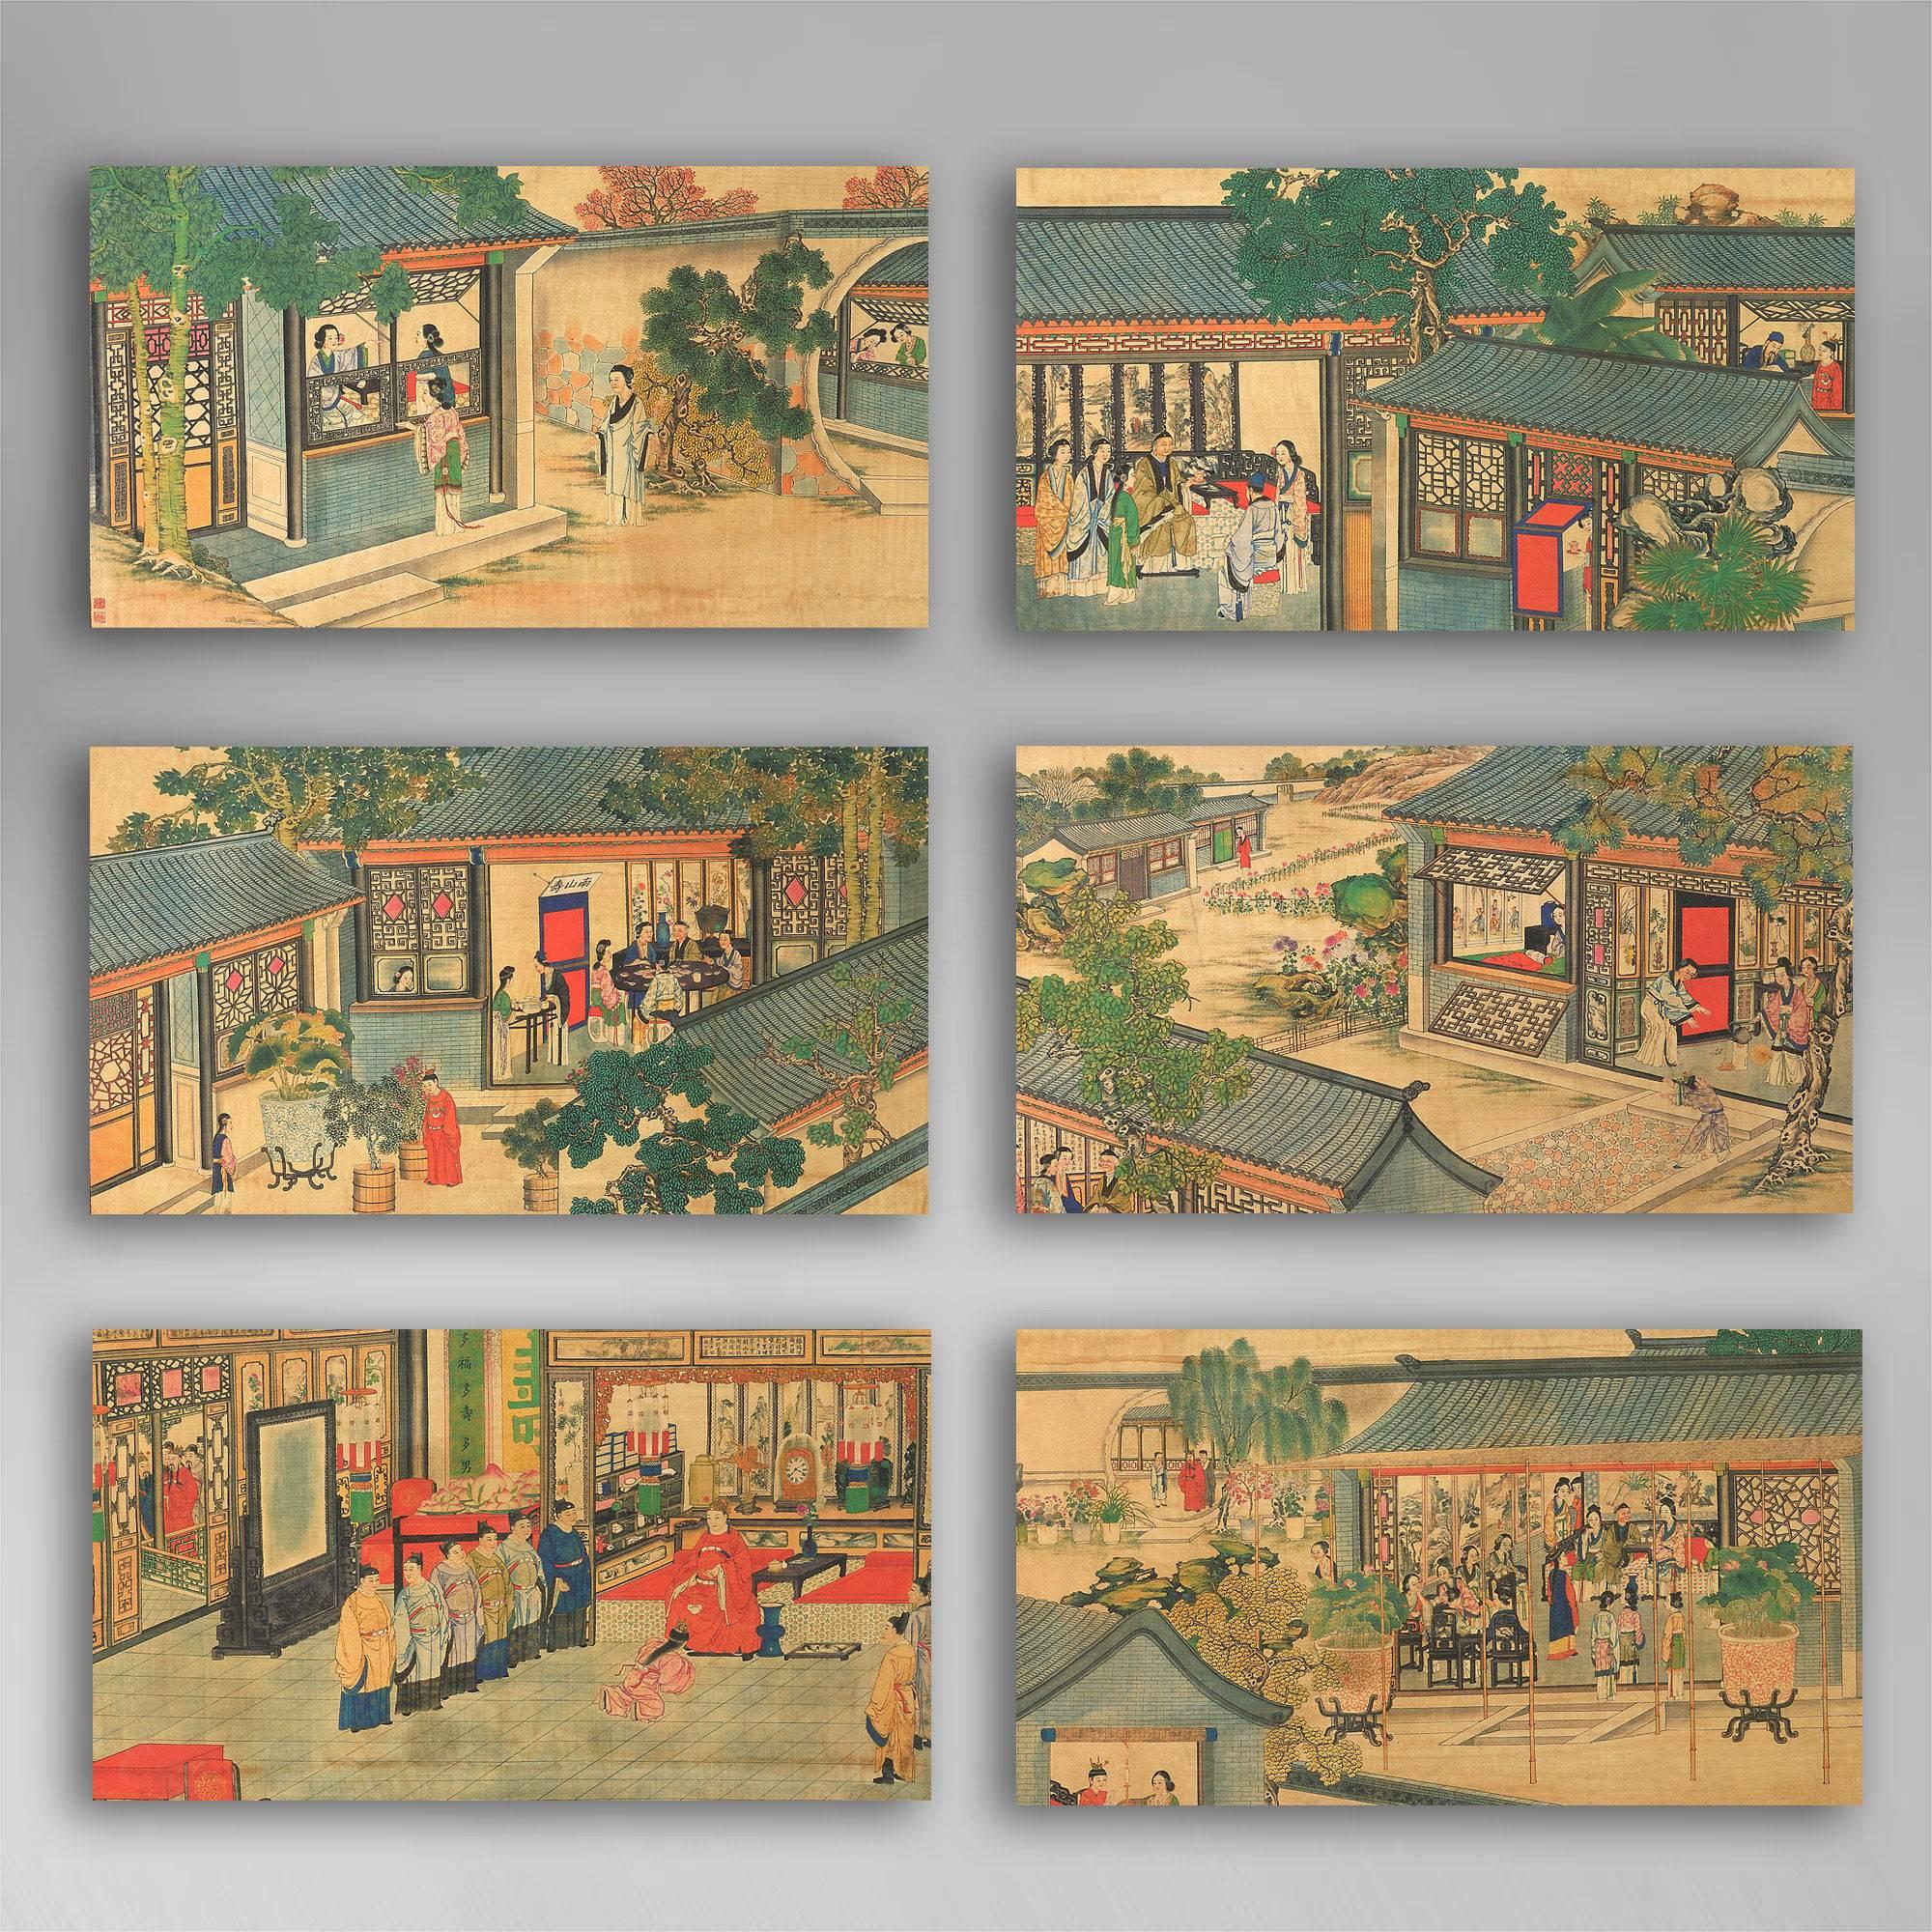 24 ink and watercolor landscapes depicting scenes of court life.

These highly decorative water colors are painted on fabric and depict scenes from ‘The Dream of the Red Chamber’ - A mythical account of life during the Qing dynasty.